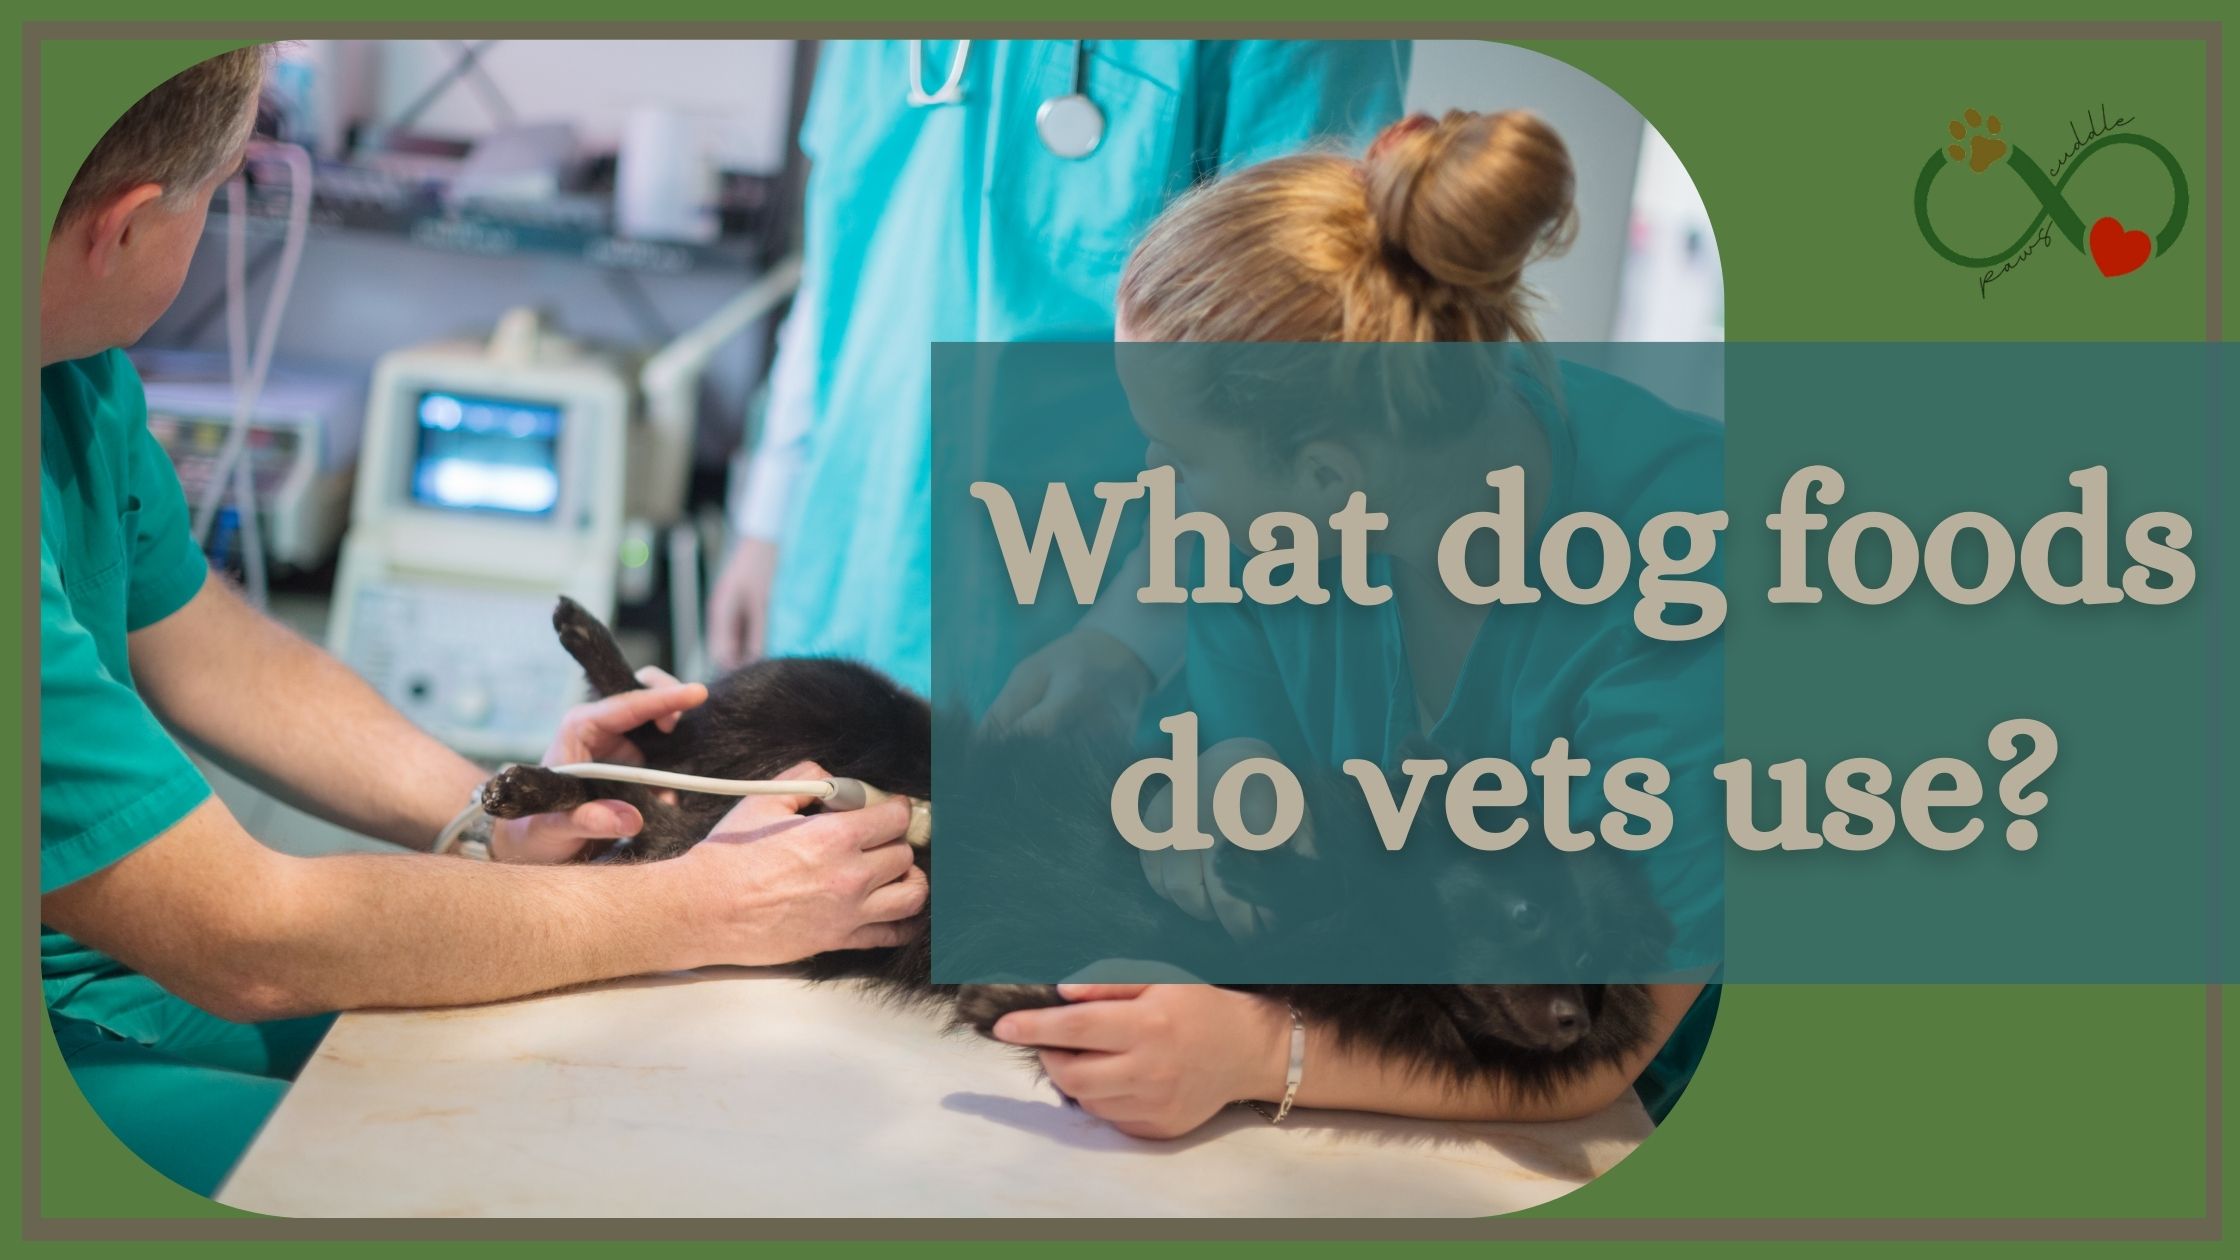 What dog foods do vets use?